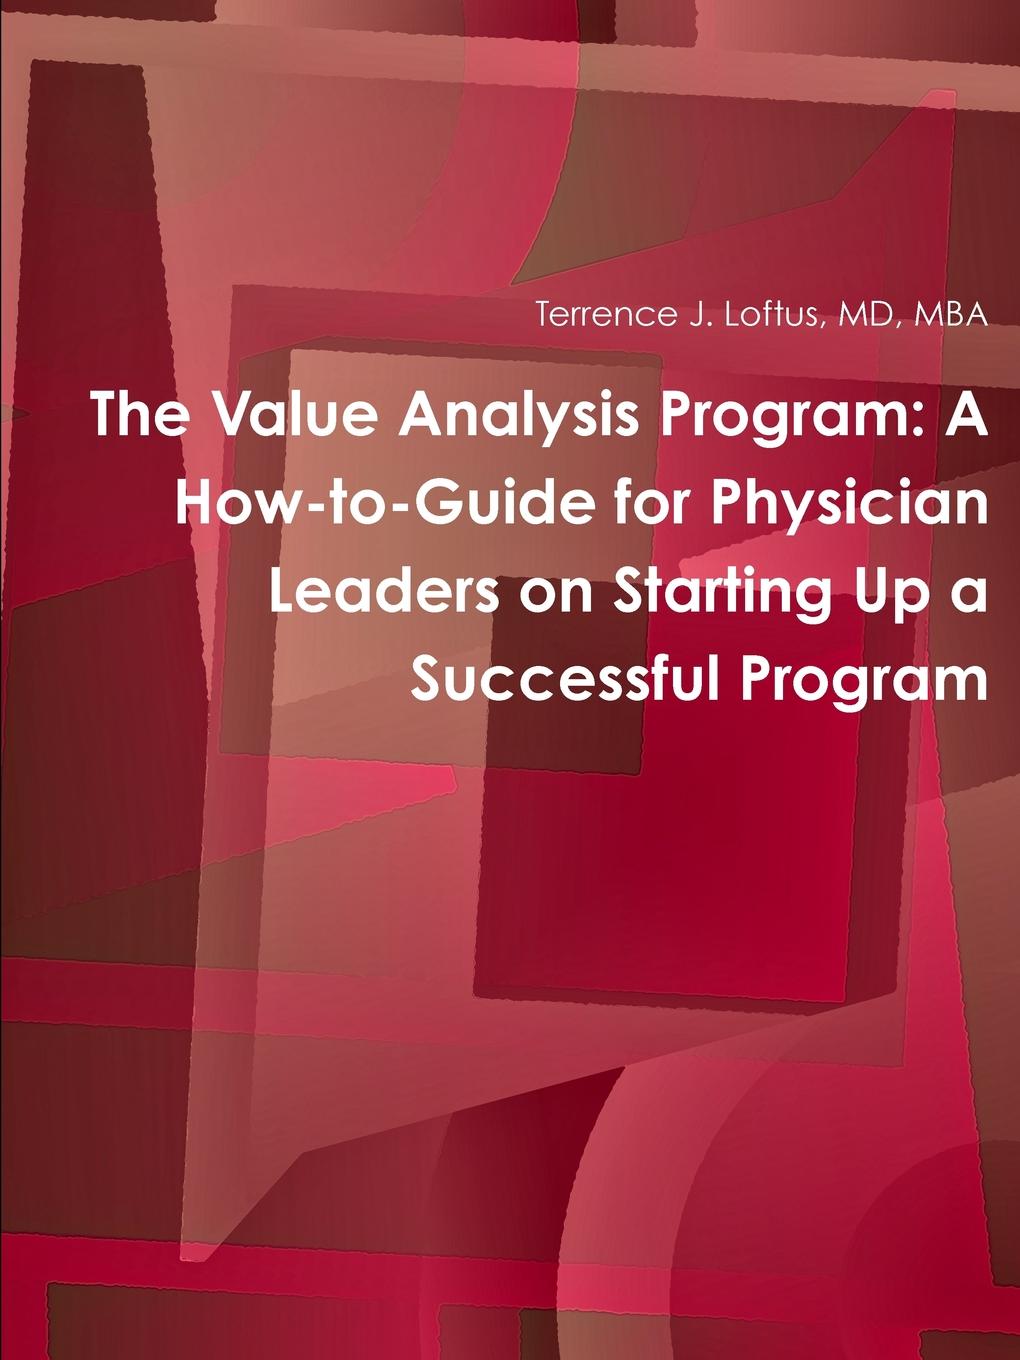 The Value Analysis Program. A How-to-Guide for Physician Leaders on Starting Up a Successful Program